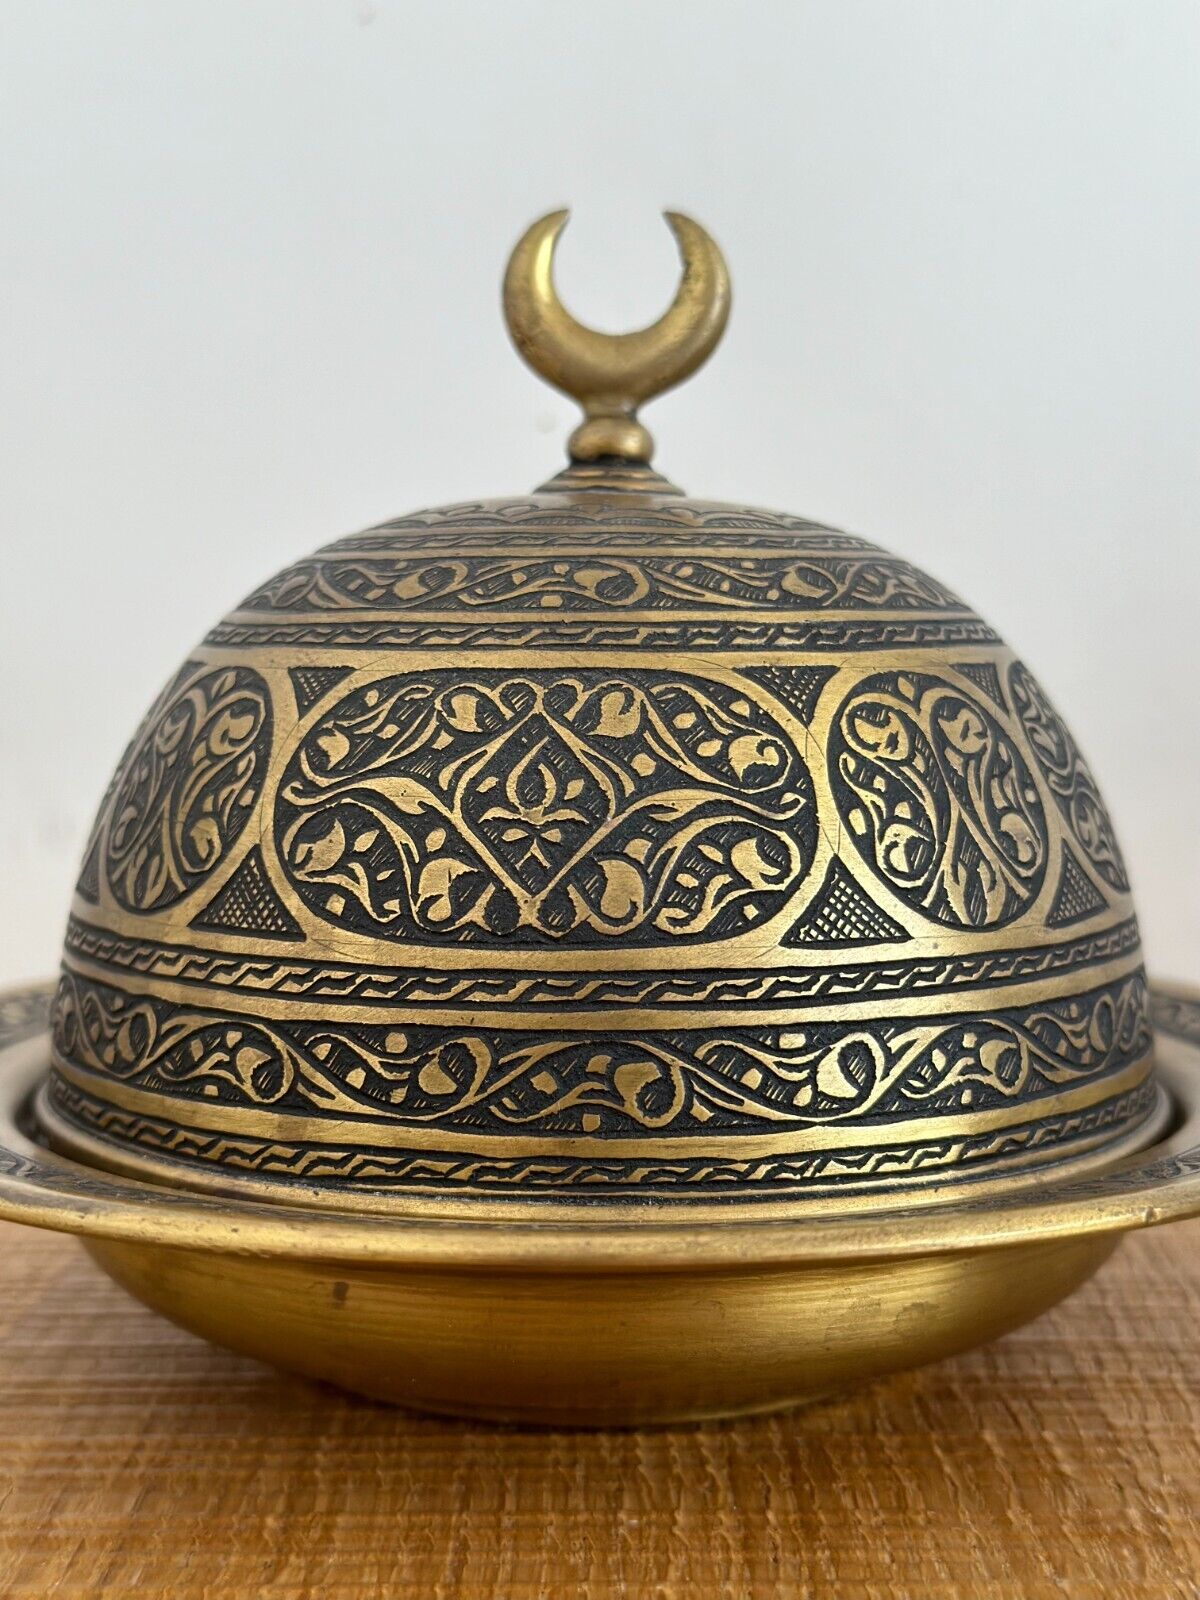 Very Special Hand Workmanship TURKİSH Authentic COPPER Dome Sugar Bowl